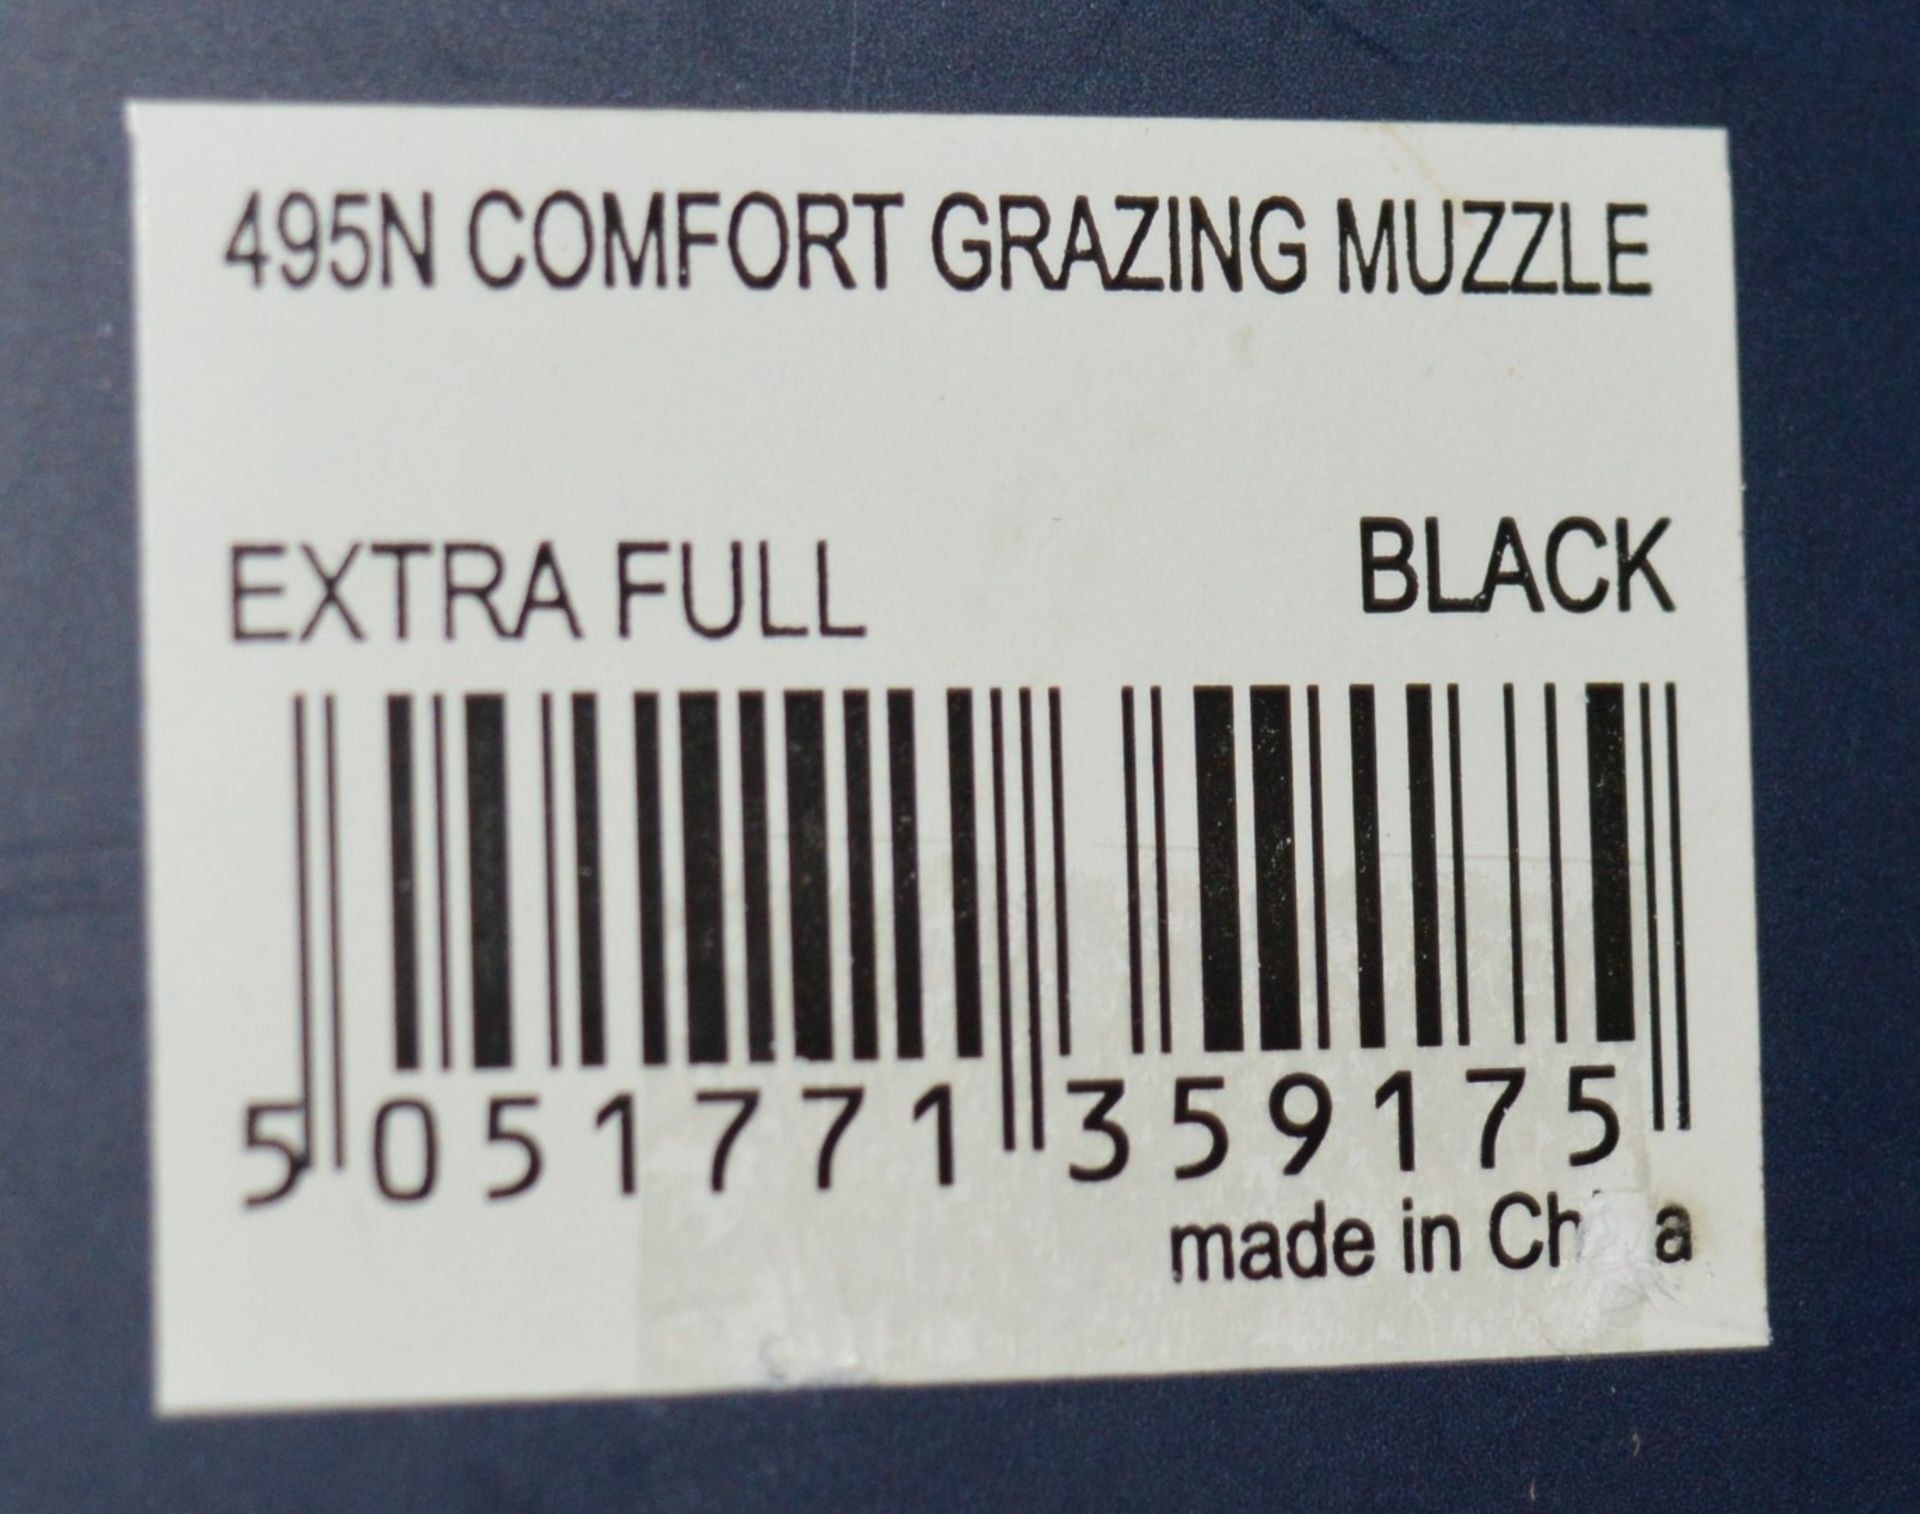 1 x Shires Comfort Grazing Muzzle - Extra Full 495N Black - New Stock - CL401 - Ref J893 - Location: - Image 2 of 3